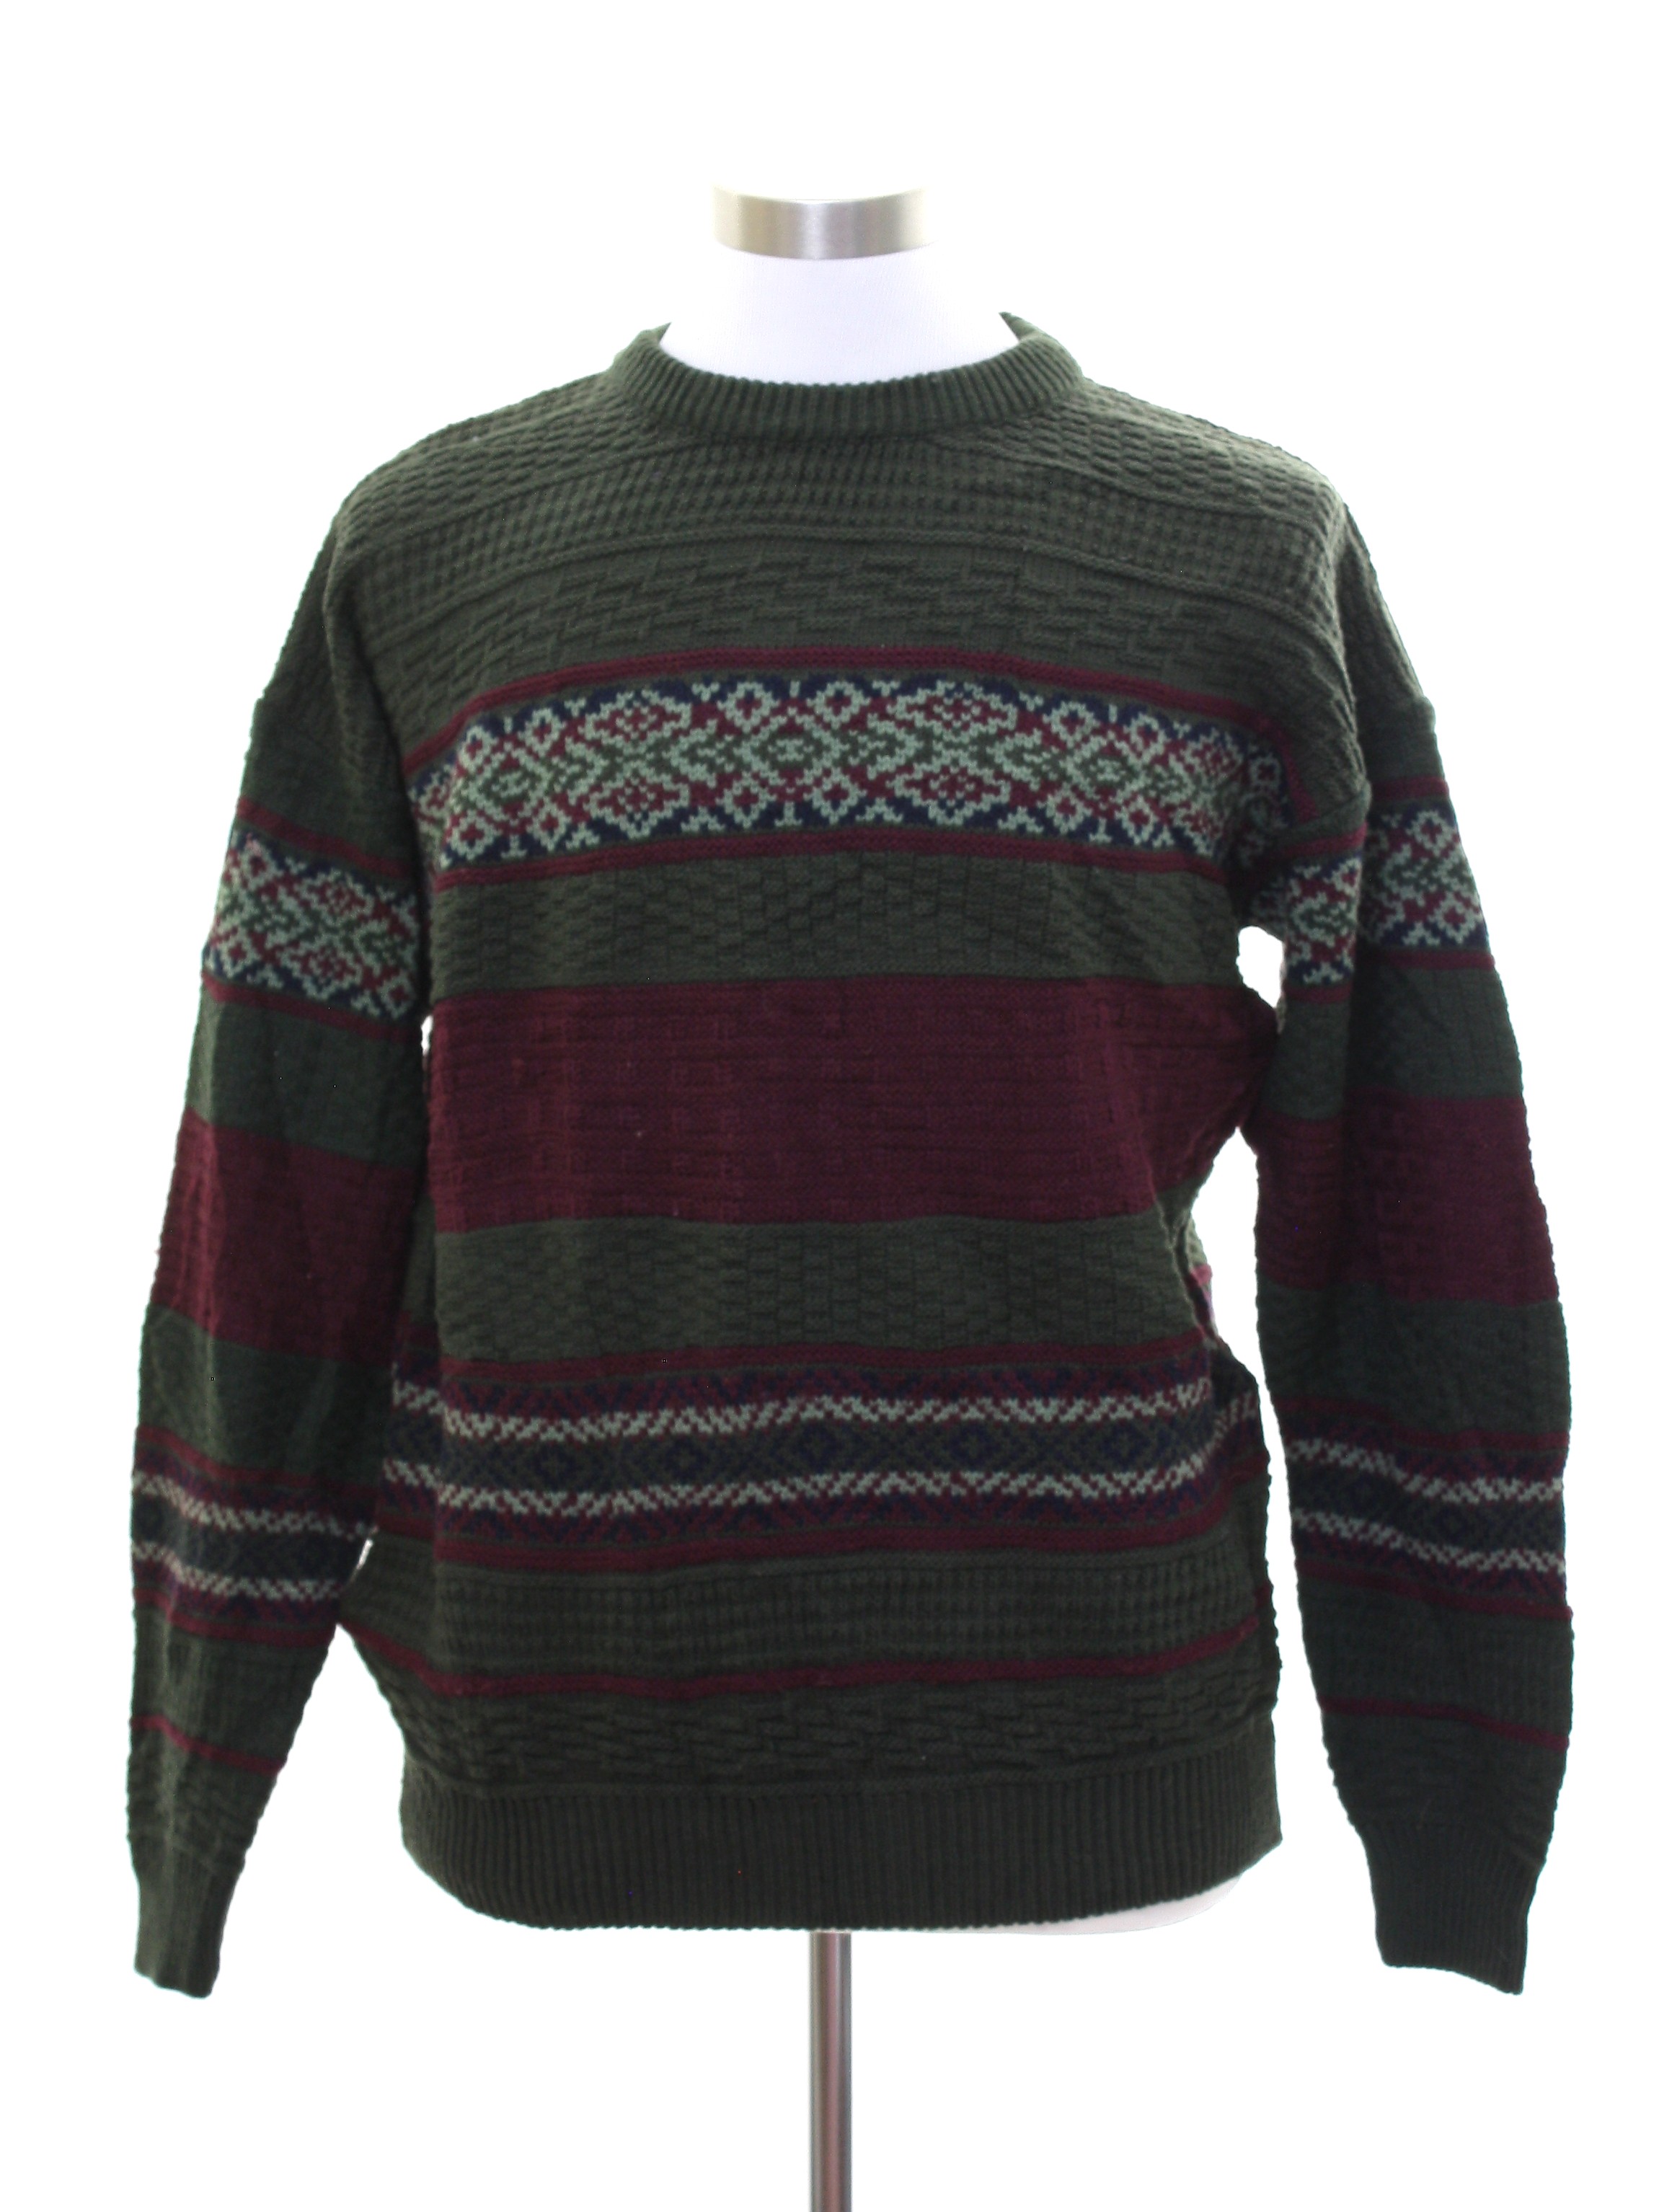 Retro 80's Sweater: 80s -Quarter and Back- Mens forest green background ...